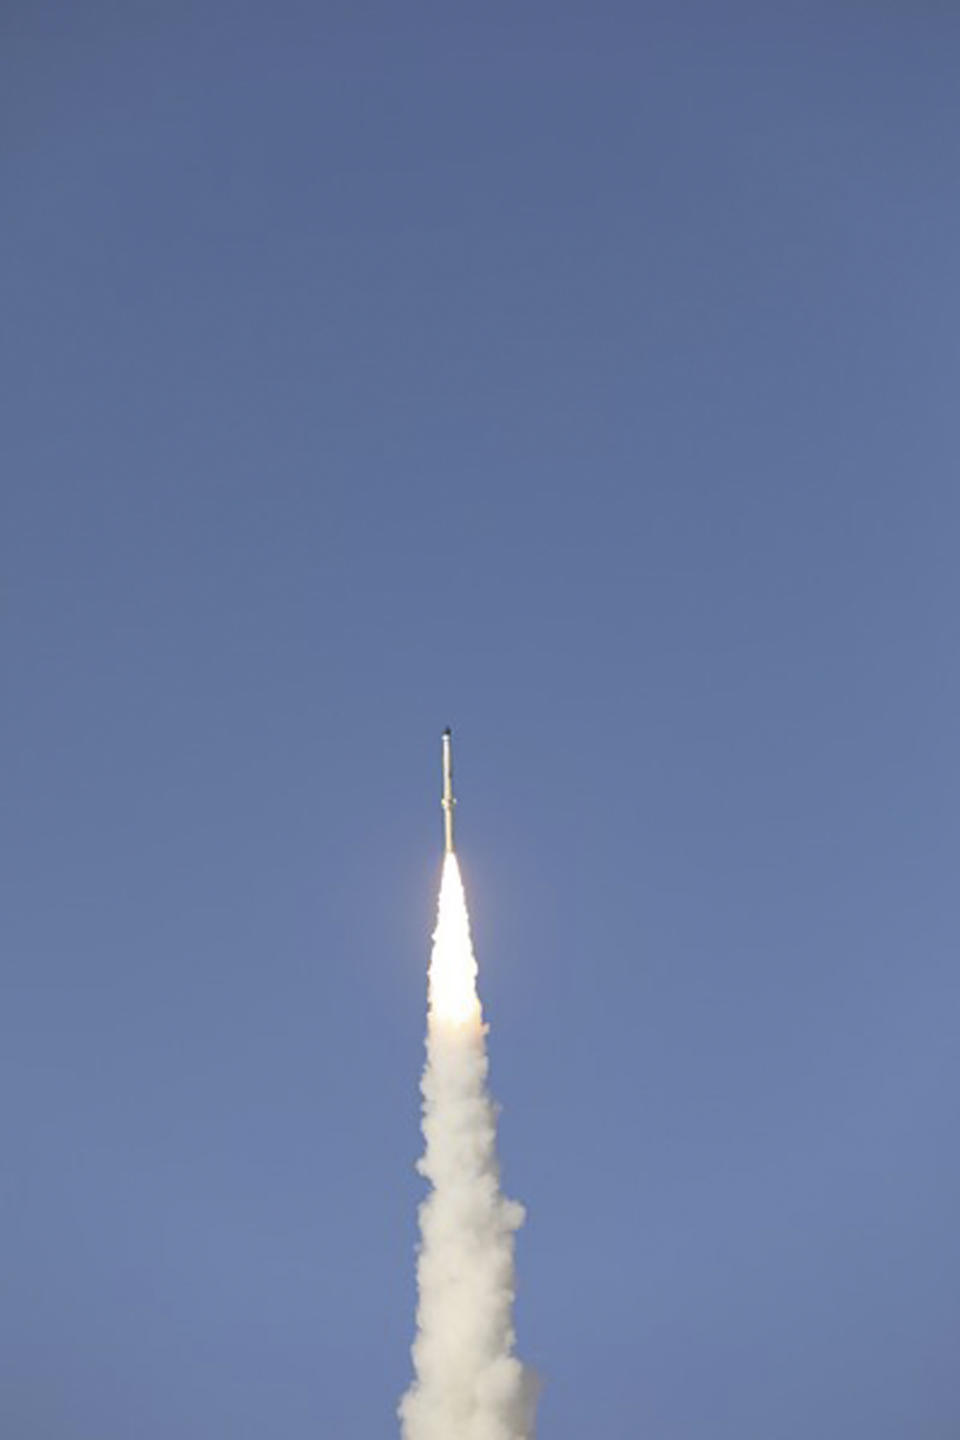 This picture released by the official website of the Iranian Defense Ministry on Monday, Feb. 1, 2021, shows the launch of Iran's newest satellite-carrier rocket, called "Zuljanah," at an undisclosed location, Iran. State TV on Monday aired the launch of the rocket, which it said was able to reach a height of 500 km (310 miles) and is capable of carrying a 200-kilogram (440-pound) satellite. It did not launch a satellite into orbit. (Iranian Defense Ministry via AP)